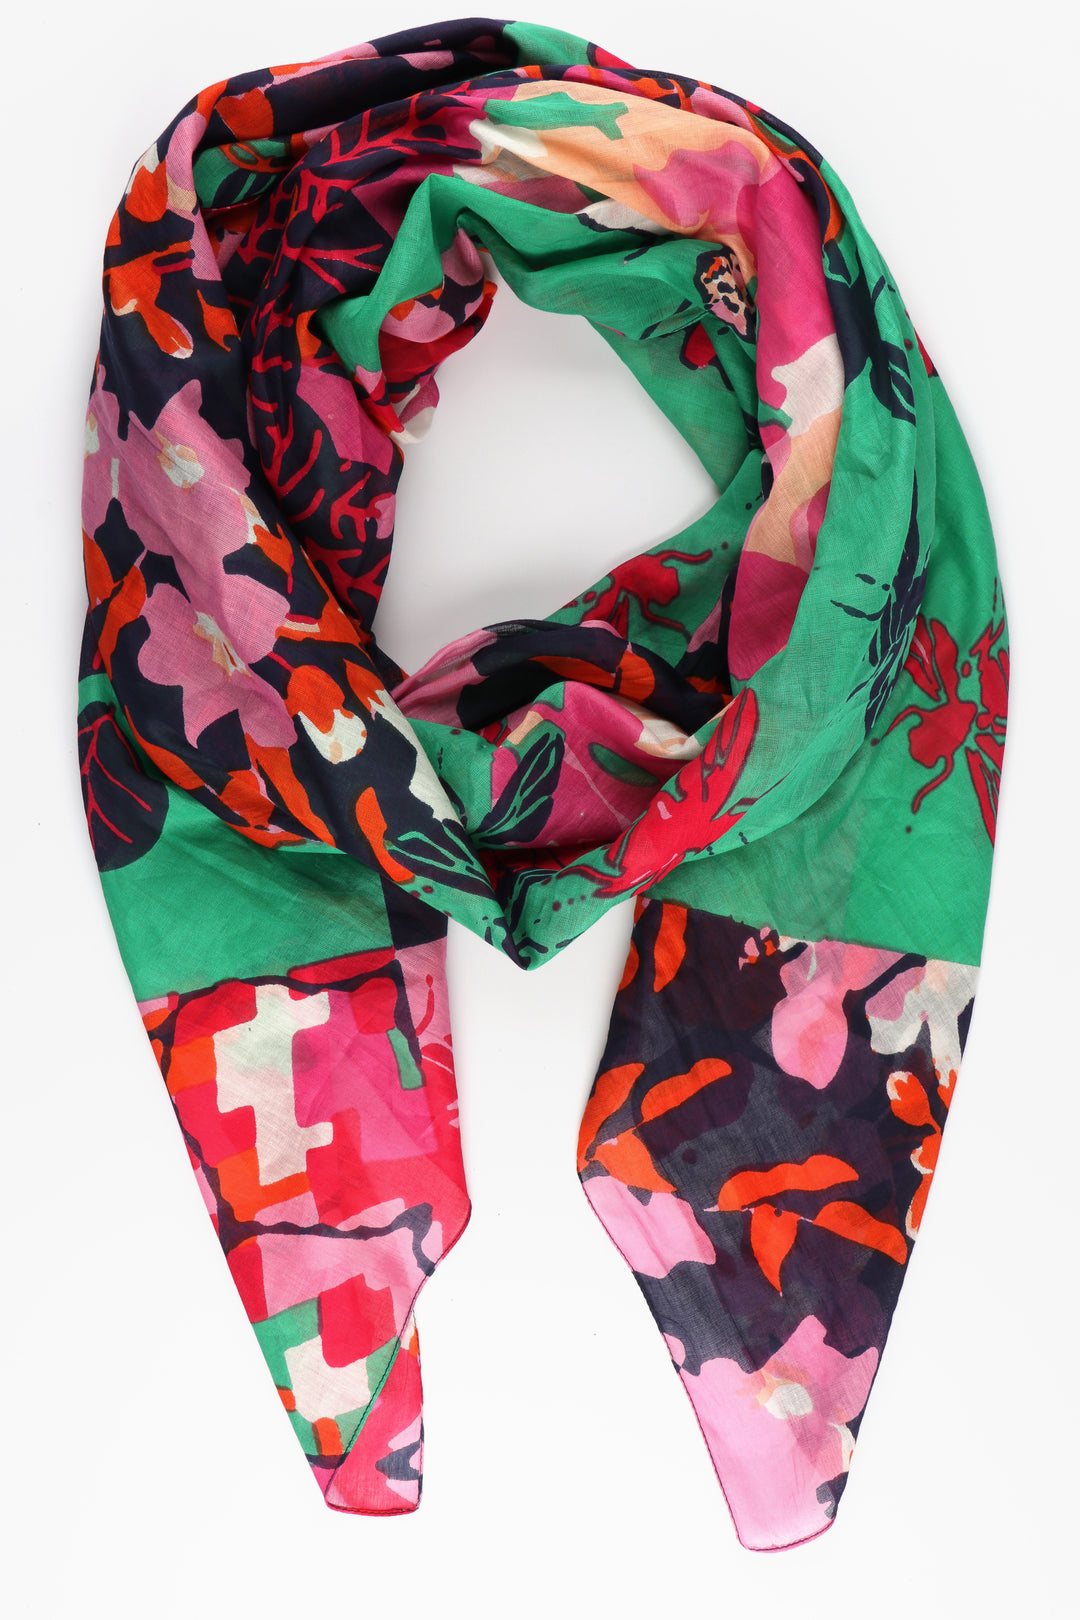 green and pink cotton scarf with a floral, tile and bee print pattern